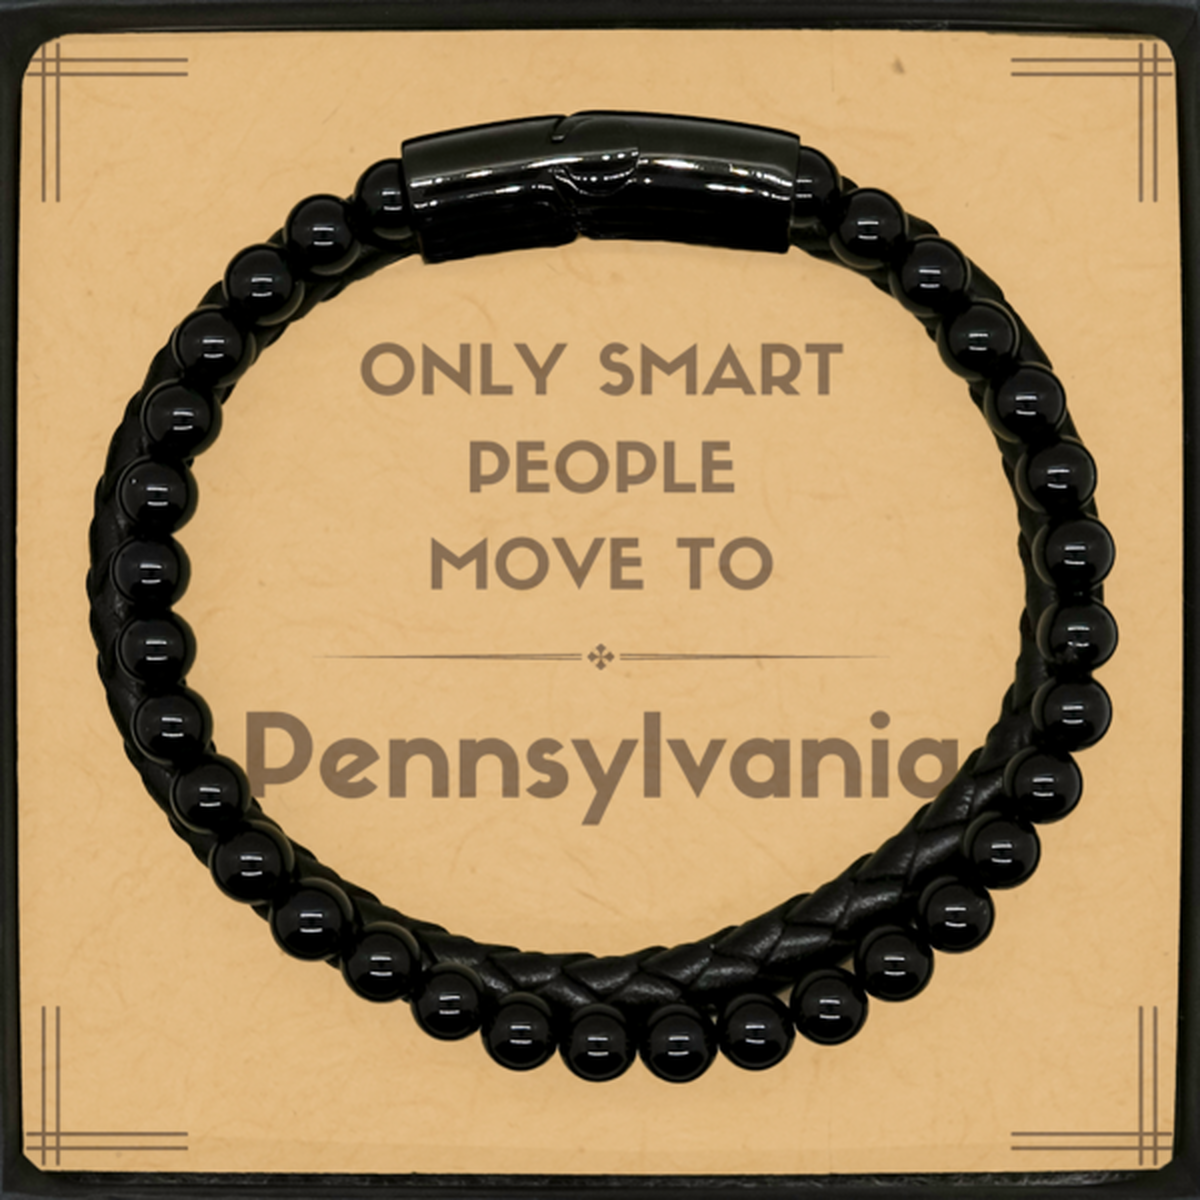 Only smart people move to Pennsylvania Stone Leather Bracelets, Message Card Gifts For Pennsylvania, Move to Pennsylvania Gifts for Friends Coworker Funny Saying Quote